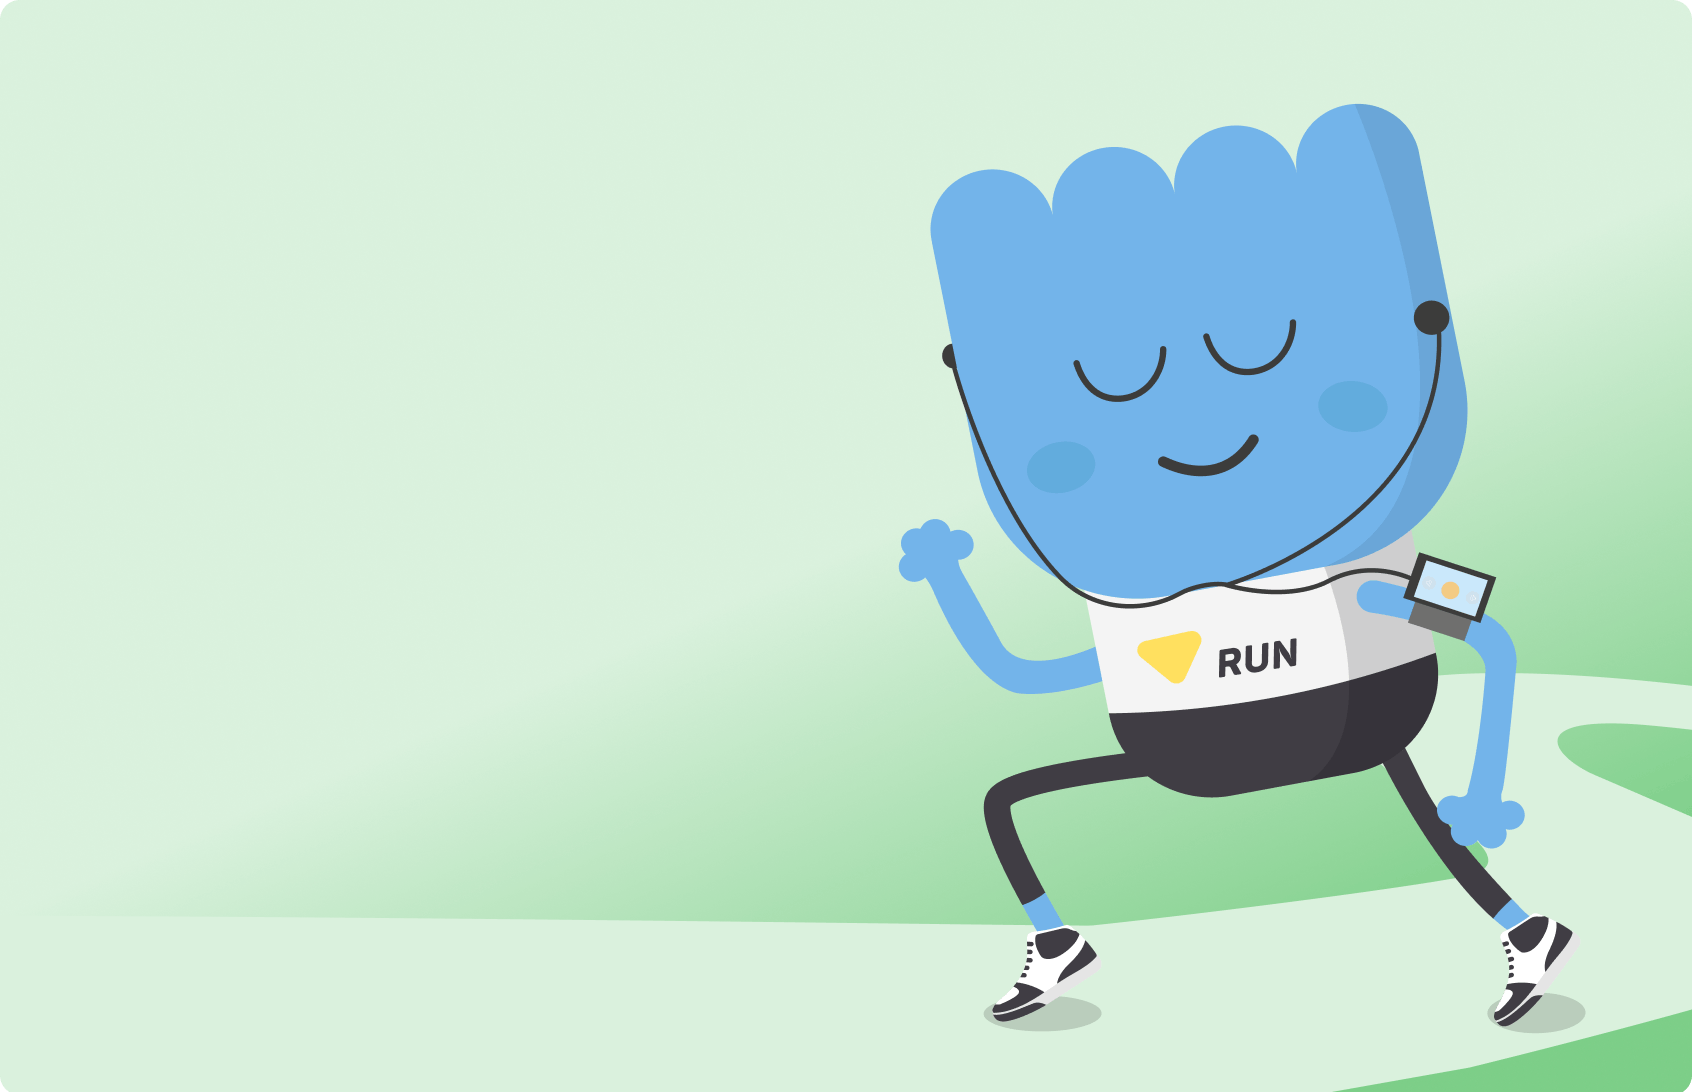 Pictured - RUNDAY character running a weekly race while listening to music